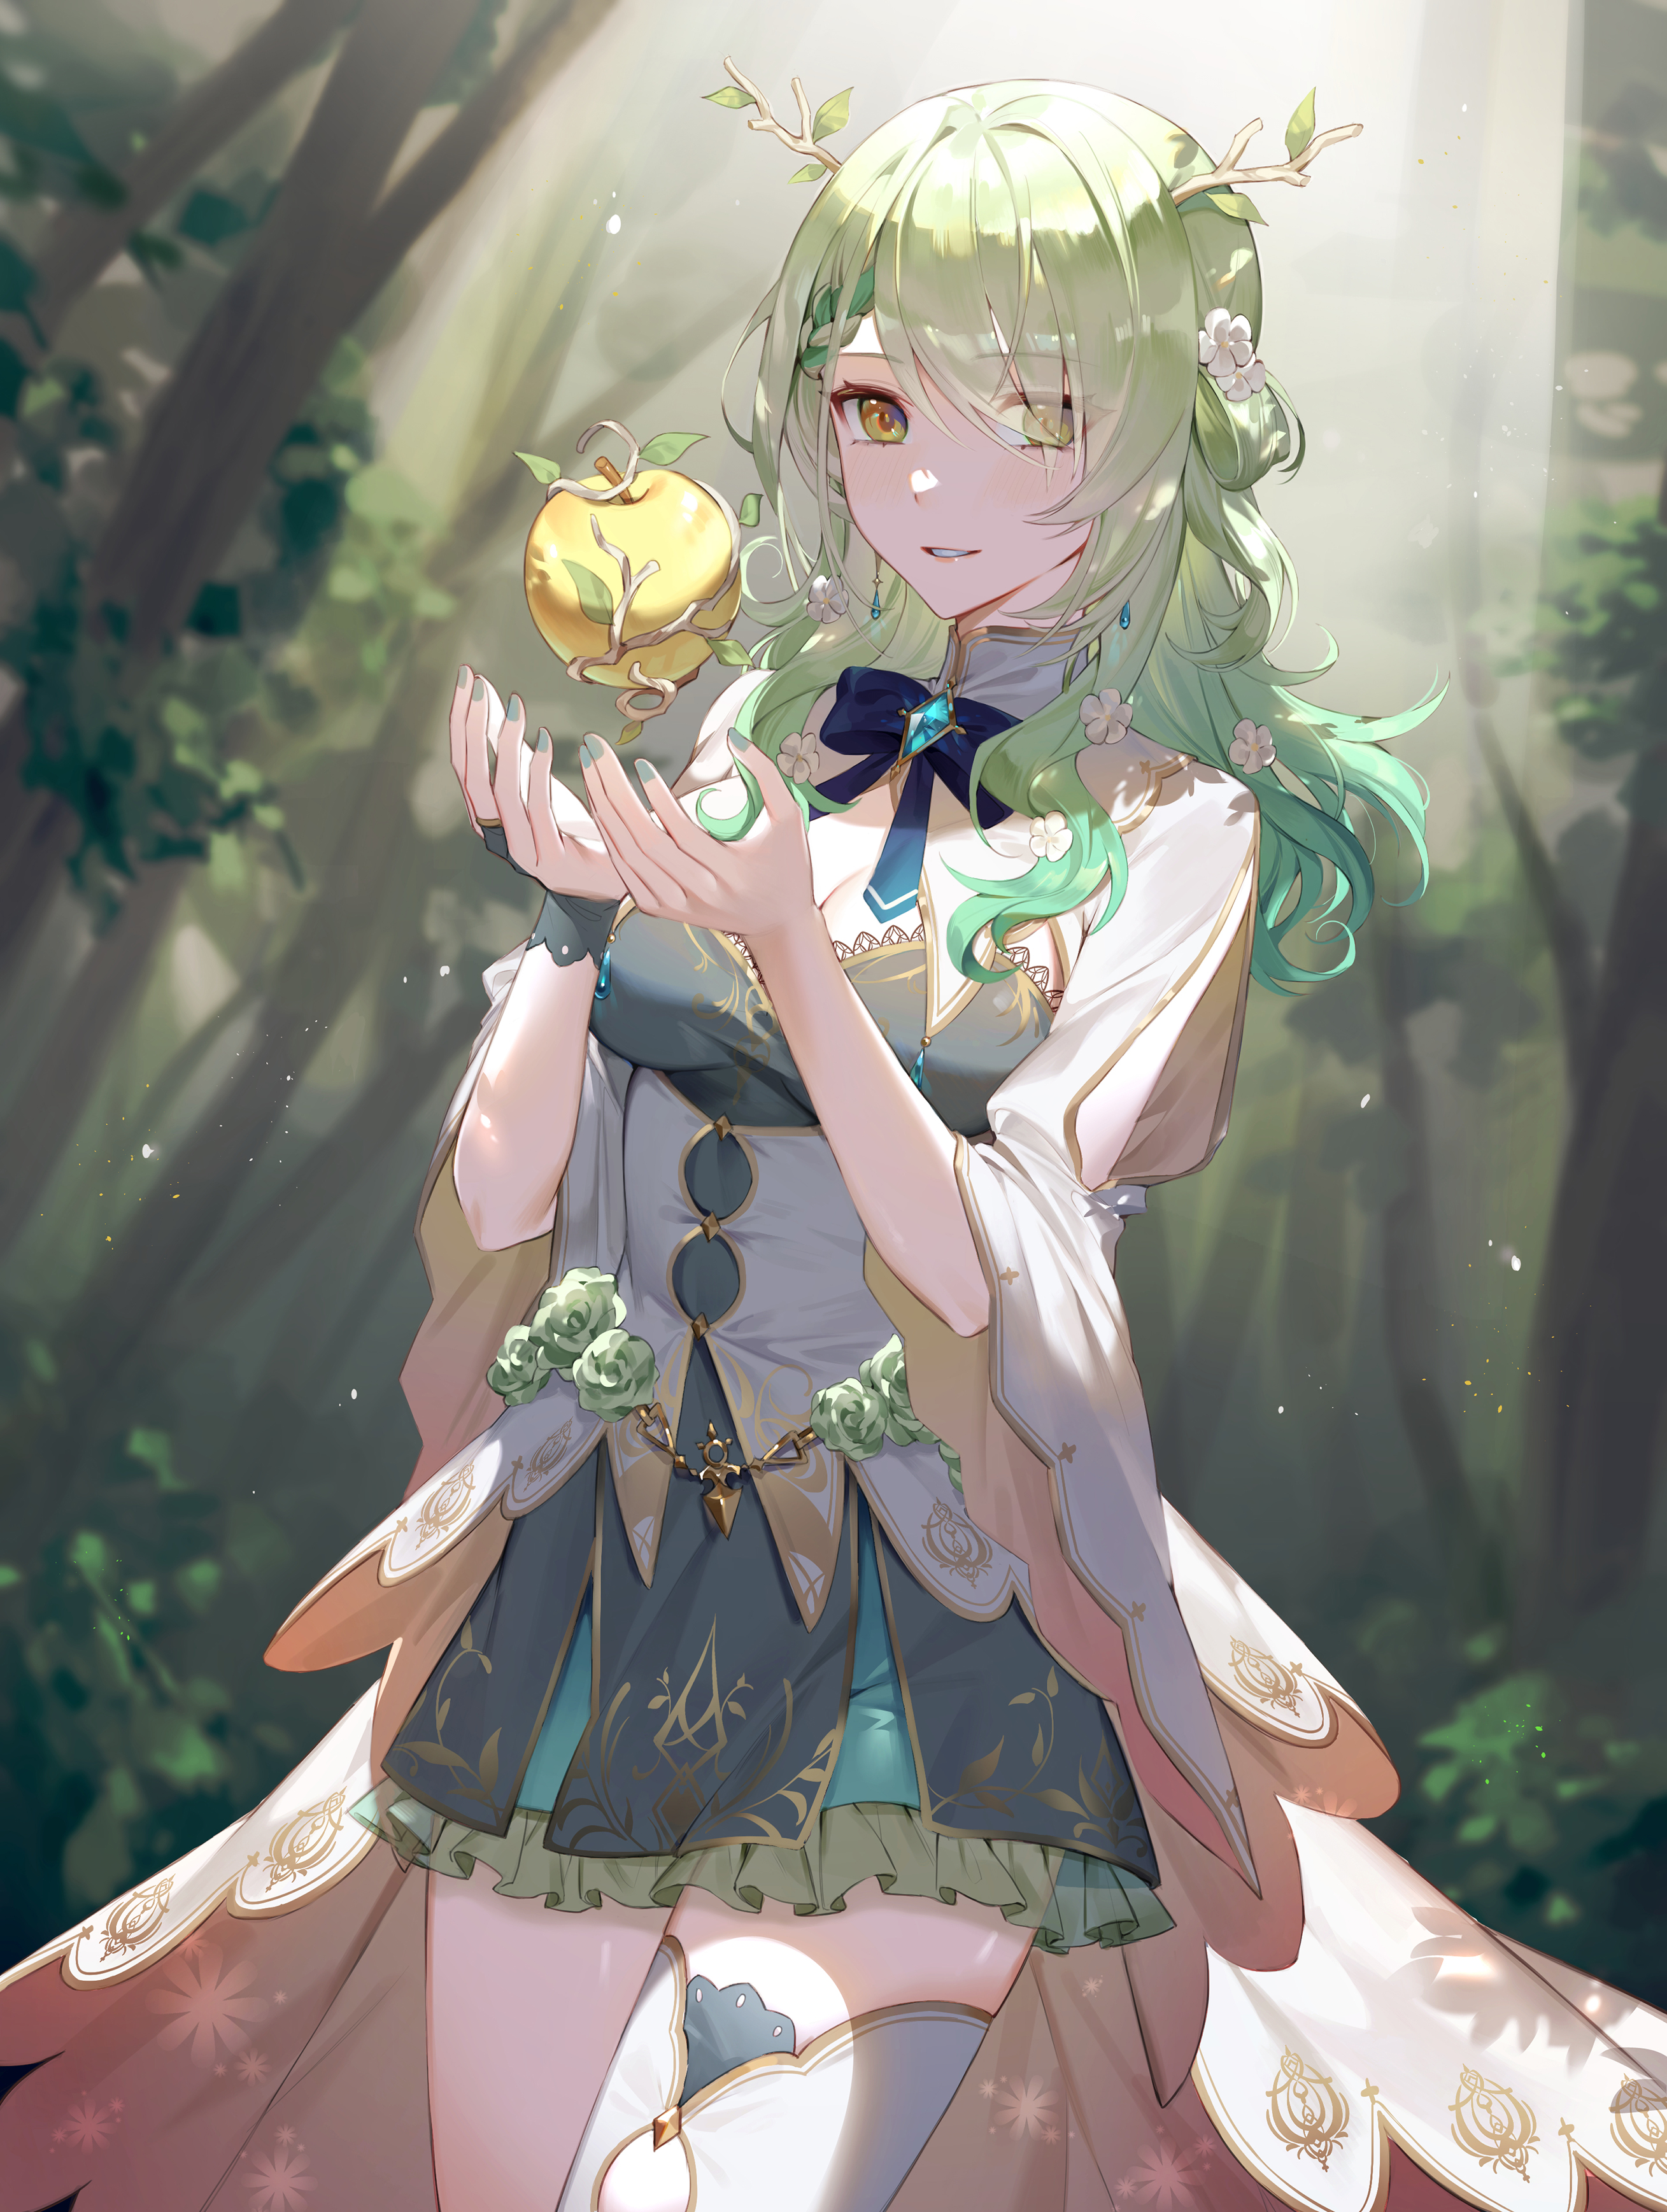 Ceres Fauna Dress Hana3901 Hololive Horns Thigh Highs Antlers Apples Blue Ribbons Branch Flowers Foo 2618x3474